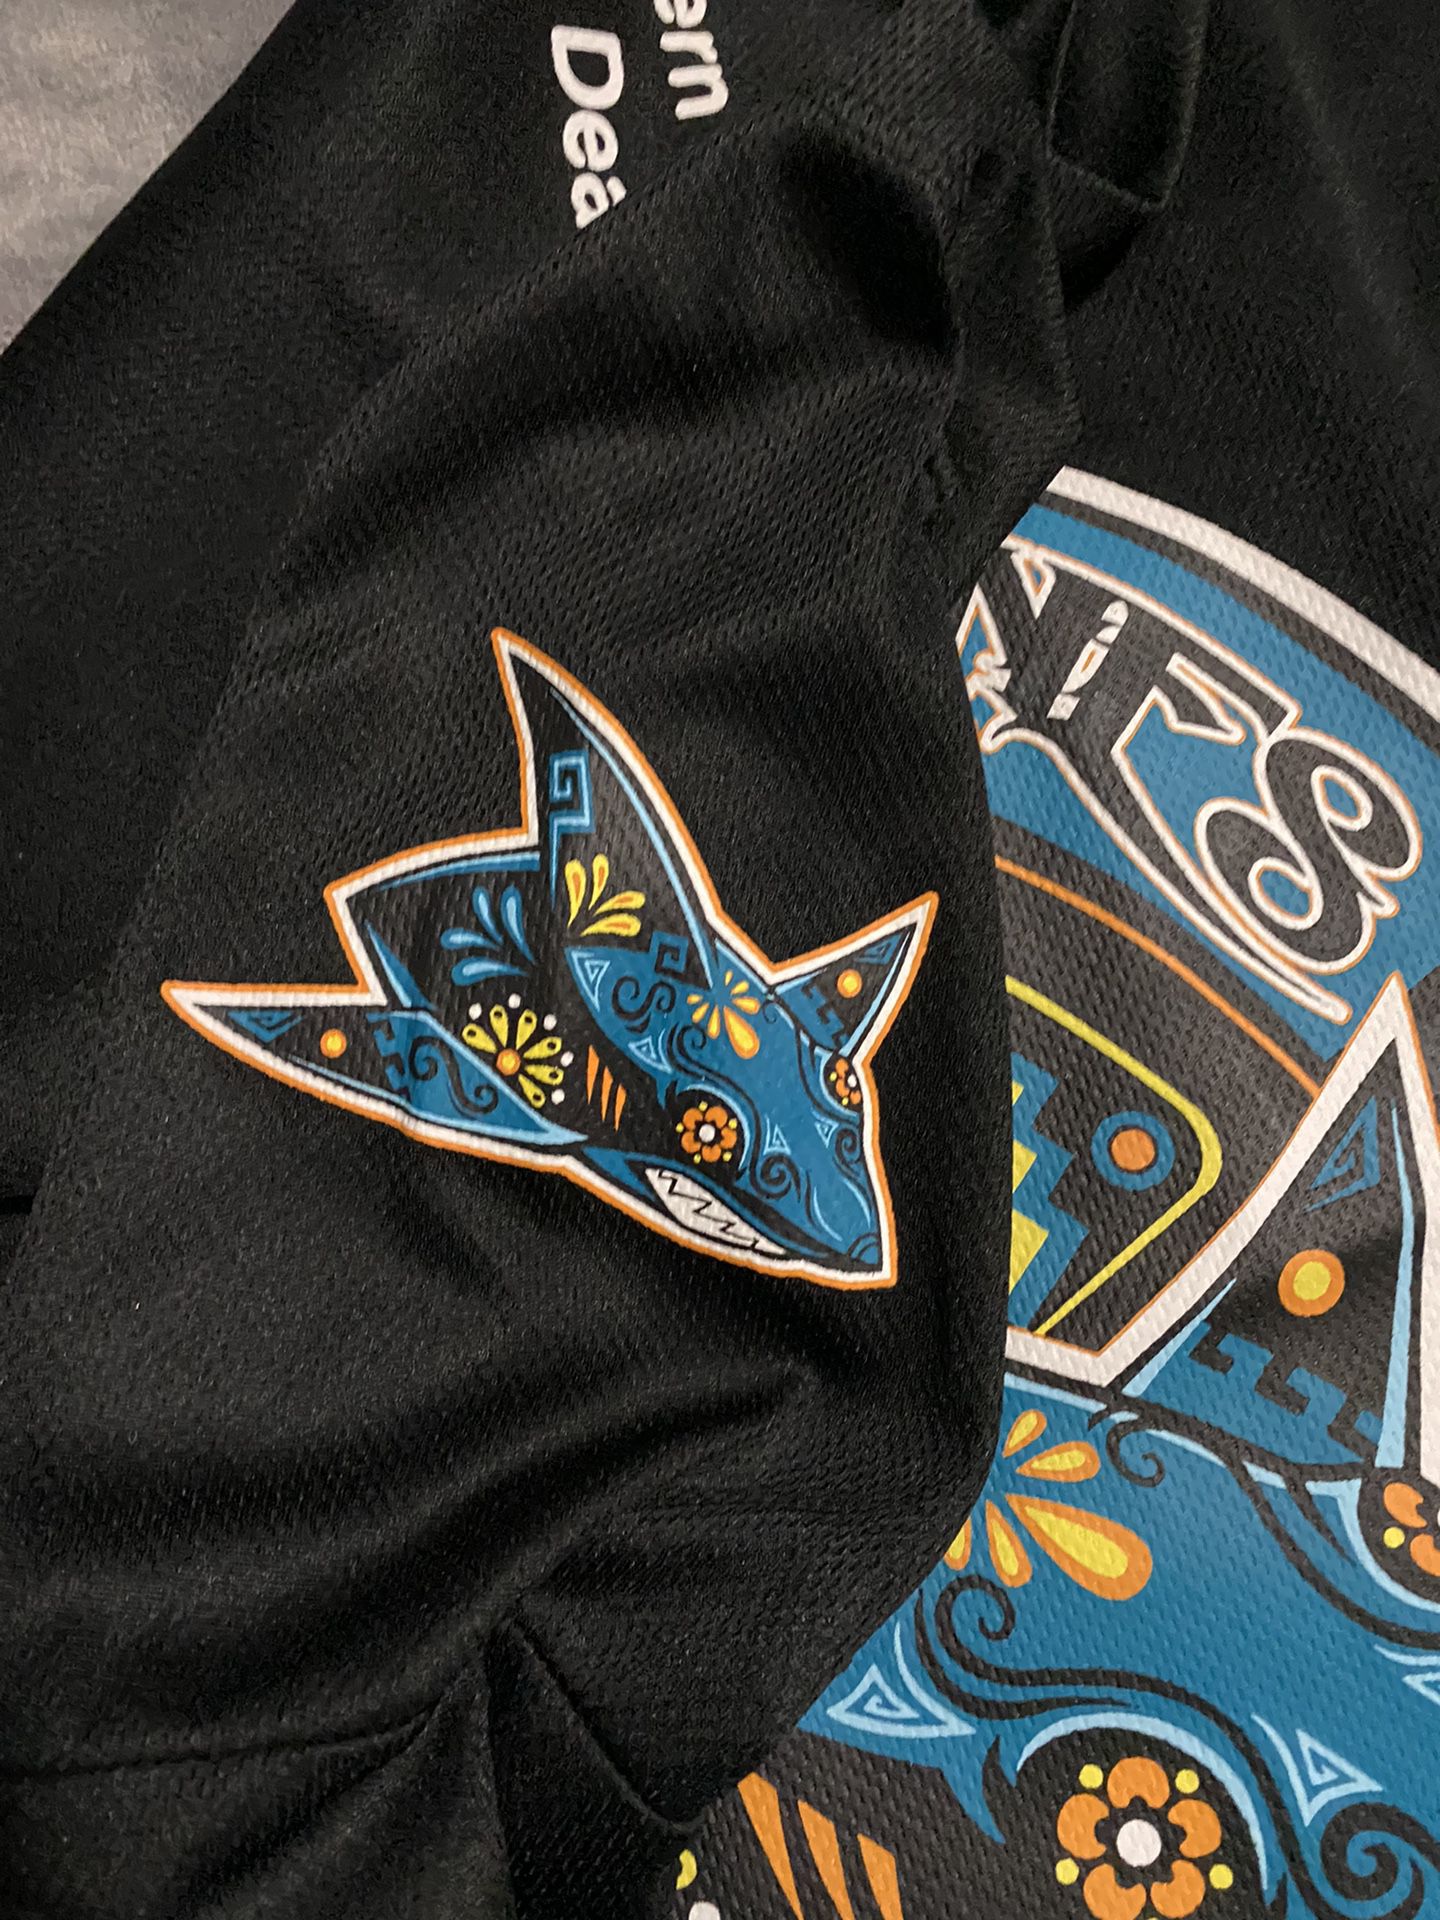 SJ Sharks NHL Woman's Large Jersey for Sale in Portland, OR - OfferUp